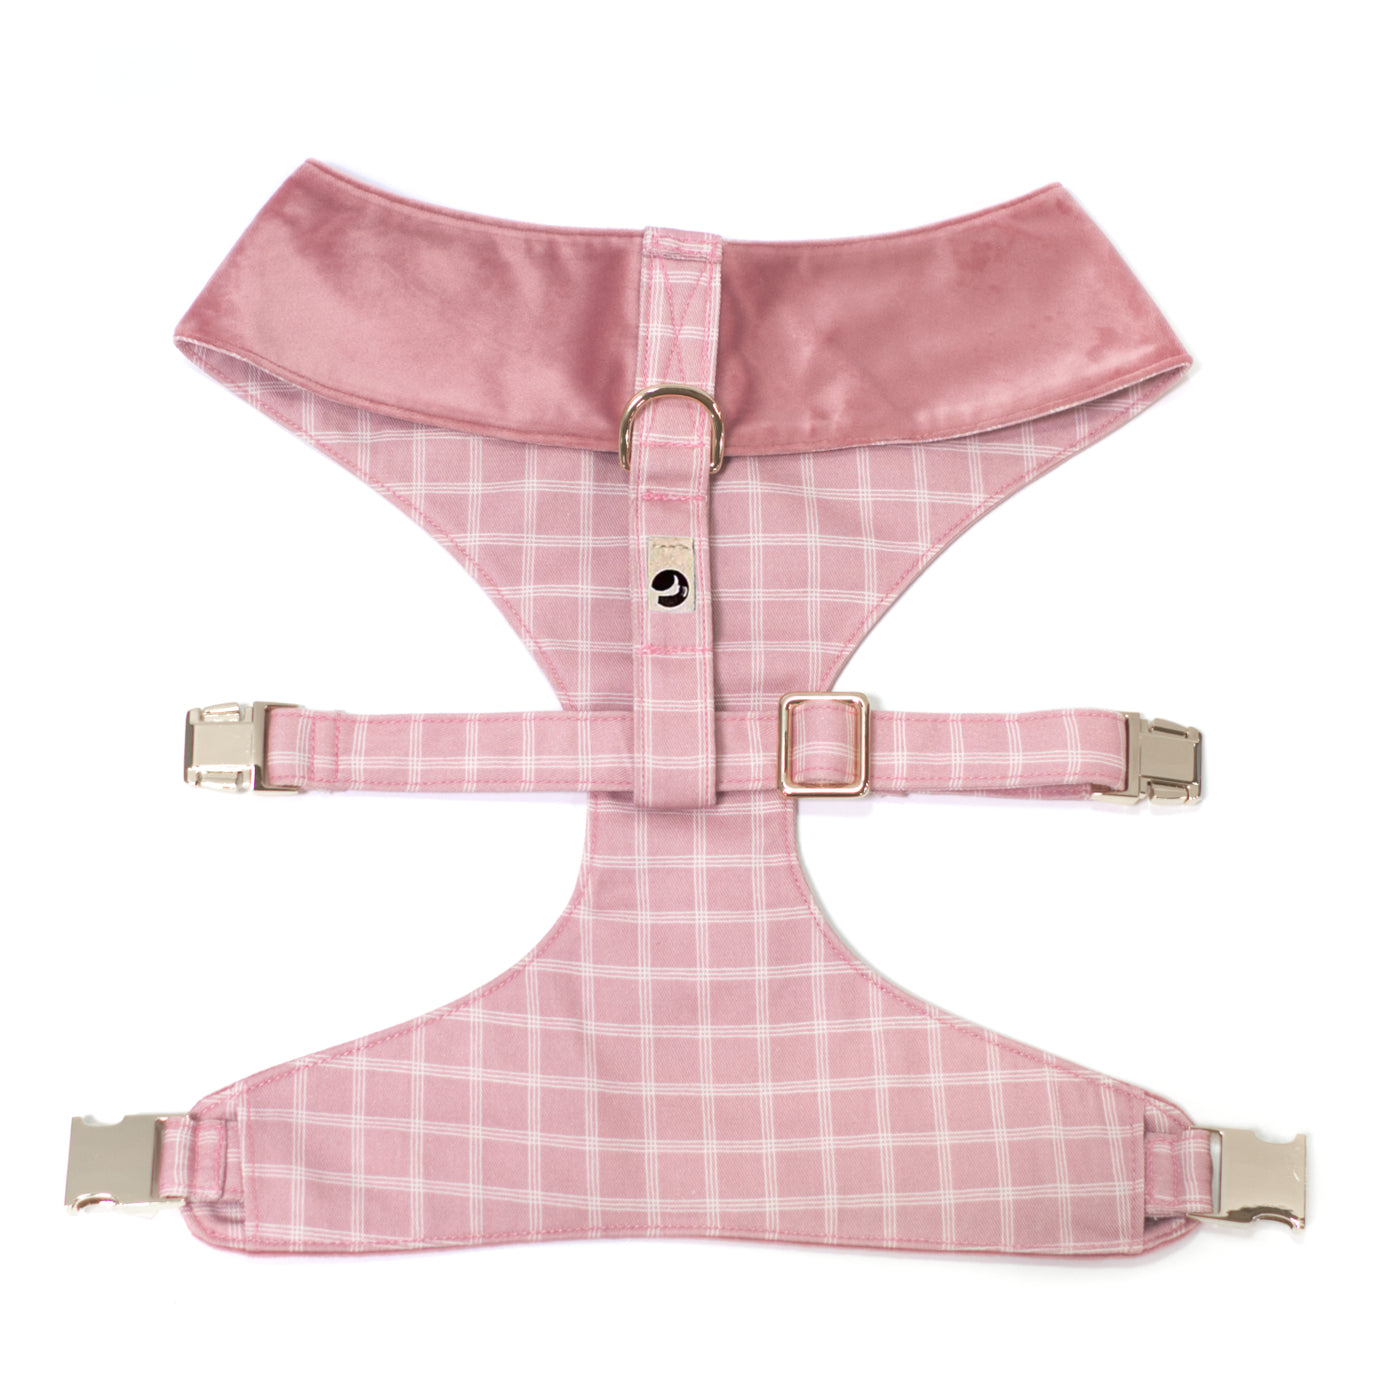 Rose pink velvet dog harness with windowpane plaid reverse shown from top/back